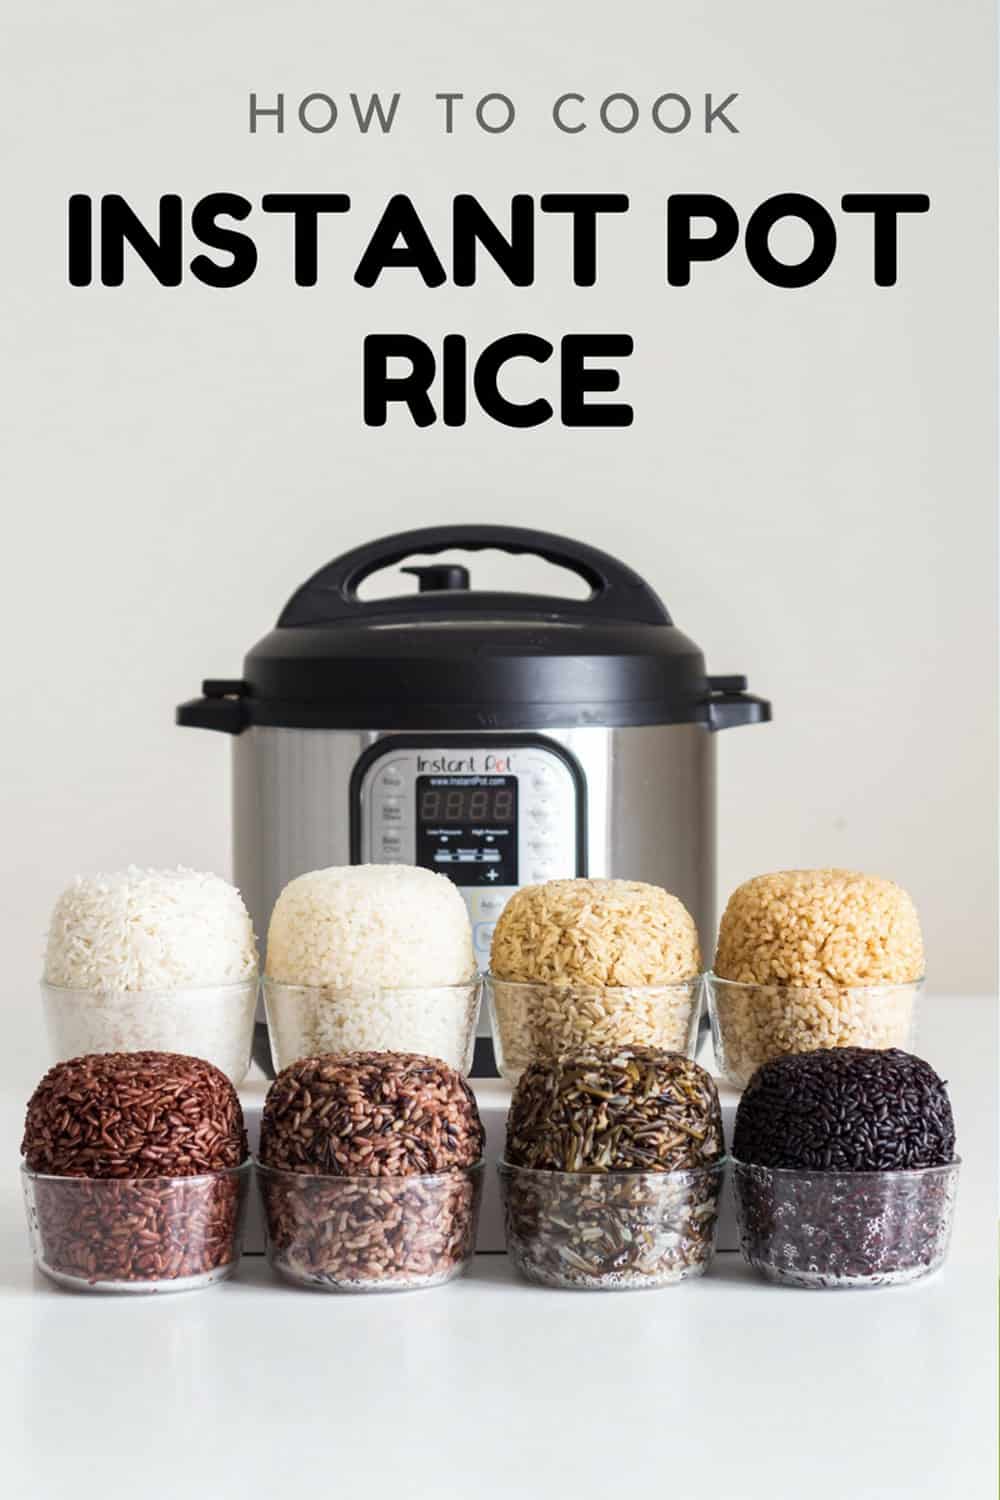 8 small bowls with different types of cooked rice placed in front of an Instant Pot